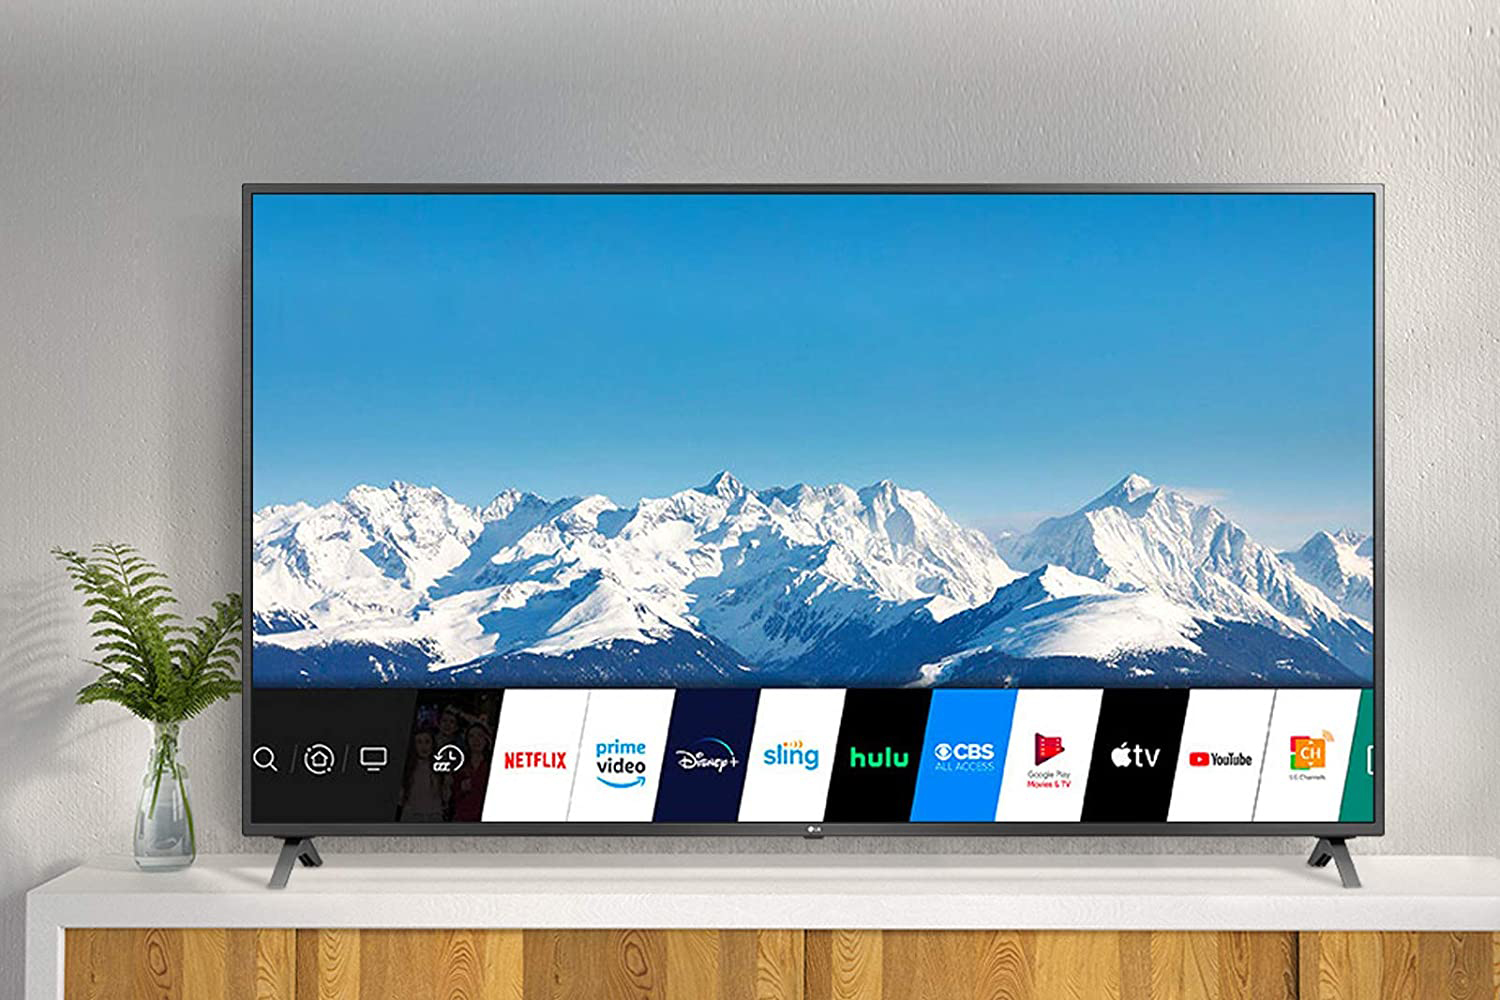 Best LG TV deals: 70-inch TV for $500 and more | Digital Trends